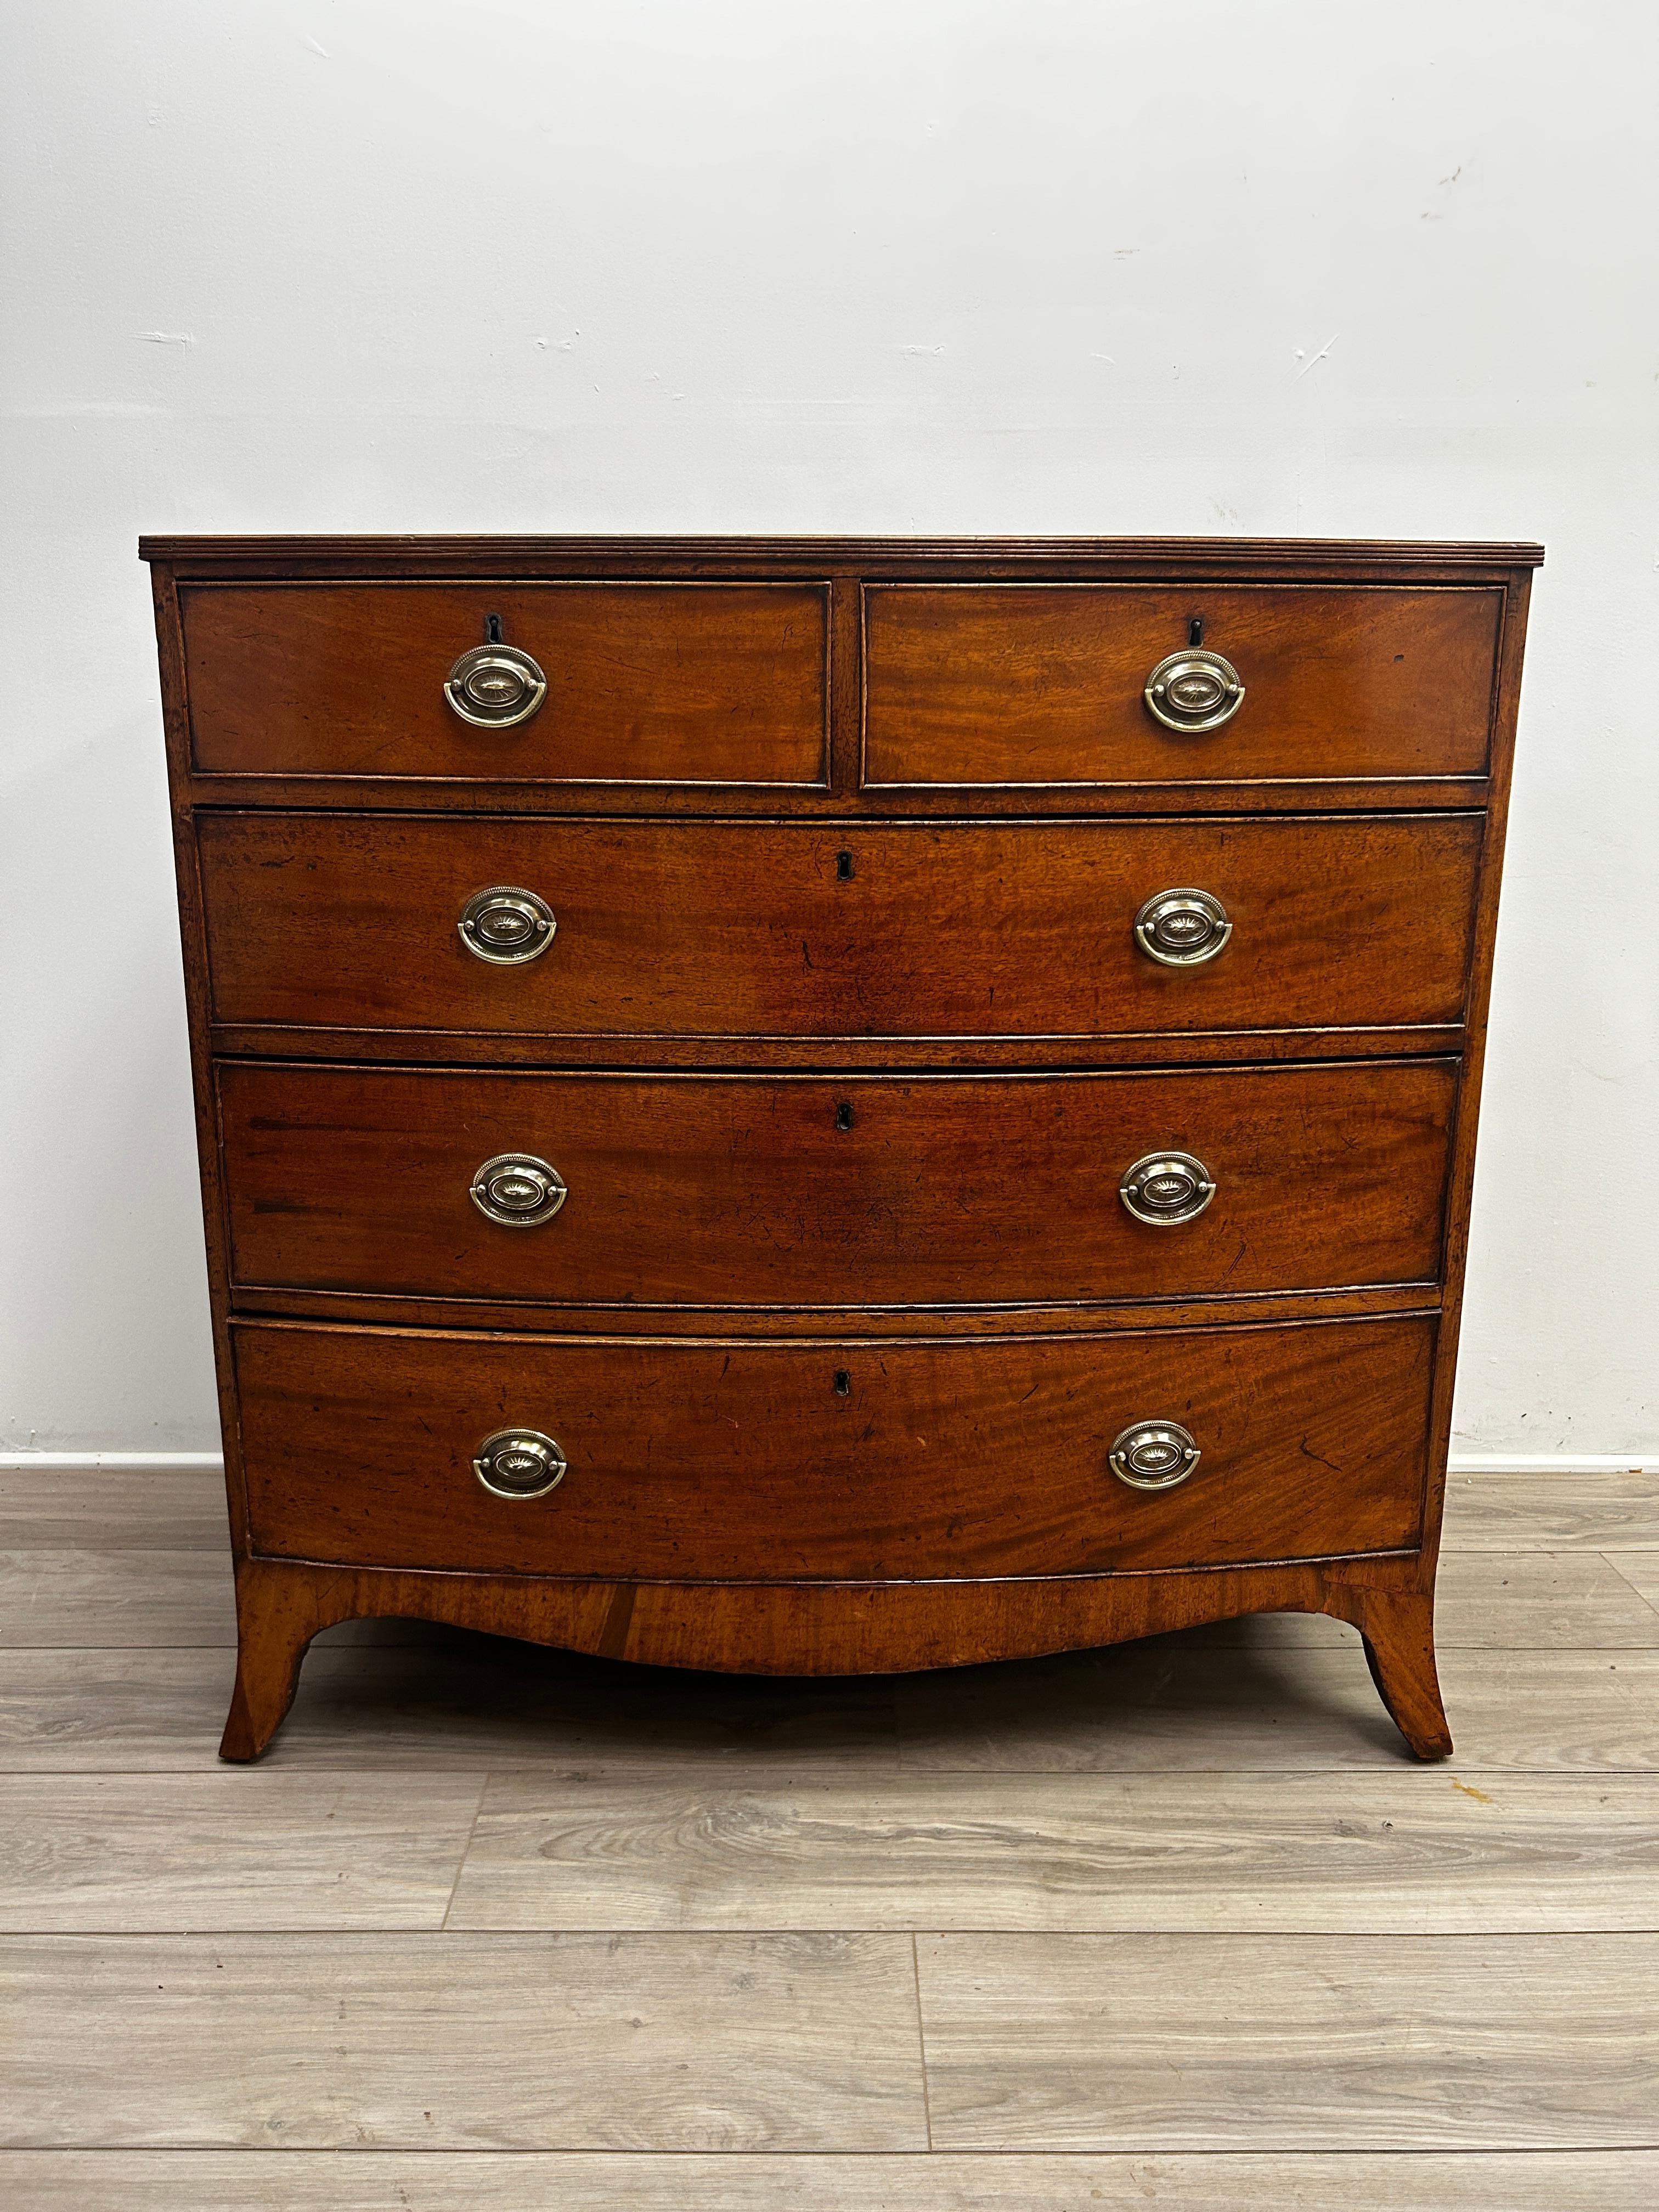 Introducing an exquisite piece of furniture that will add both elegance and functionality to any room - a 19th century English Hepplewhite style bow front chest of drawers. This stunning chest is a true testament to the skilled craftsmanship of the